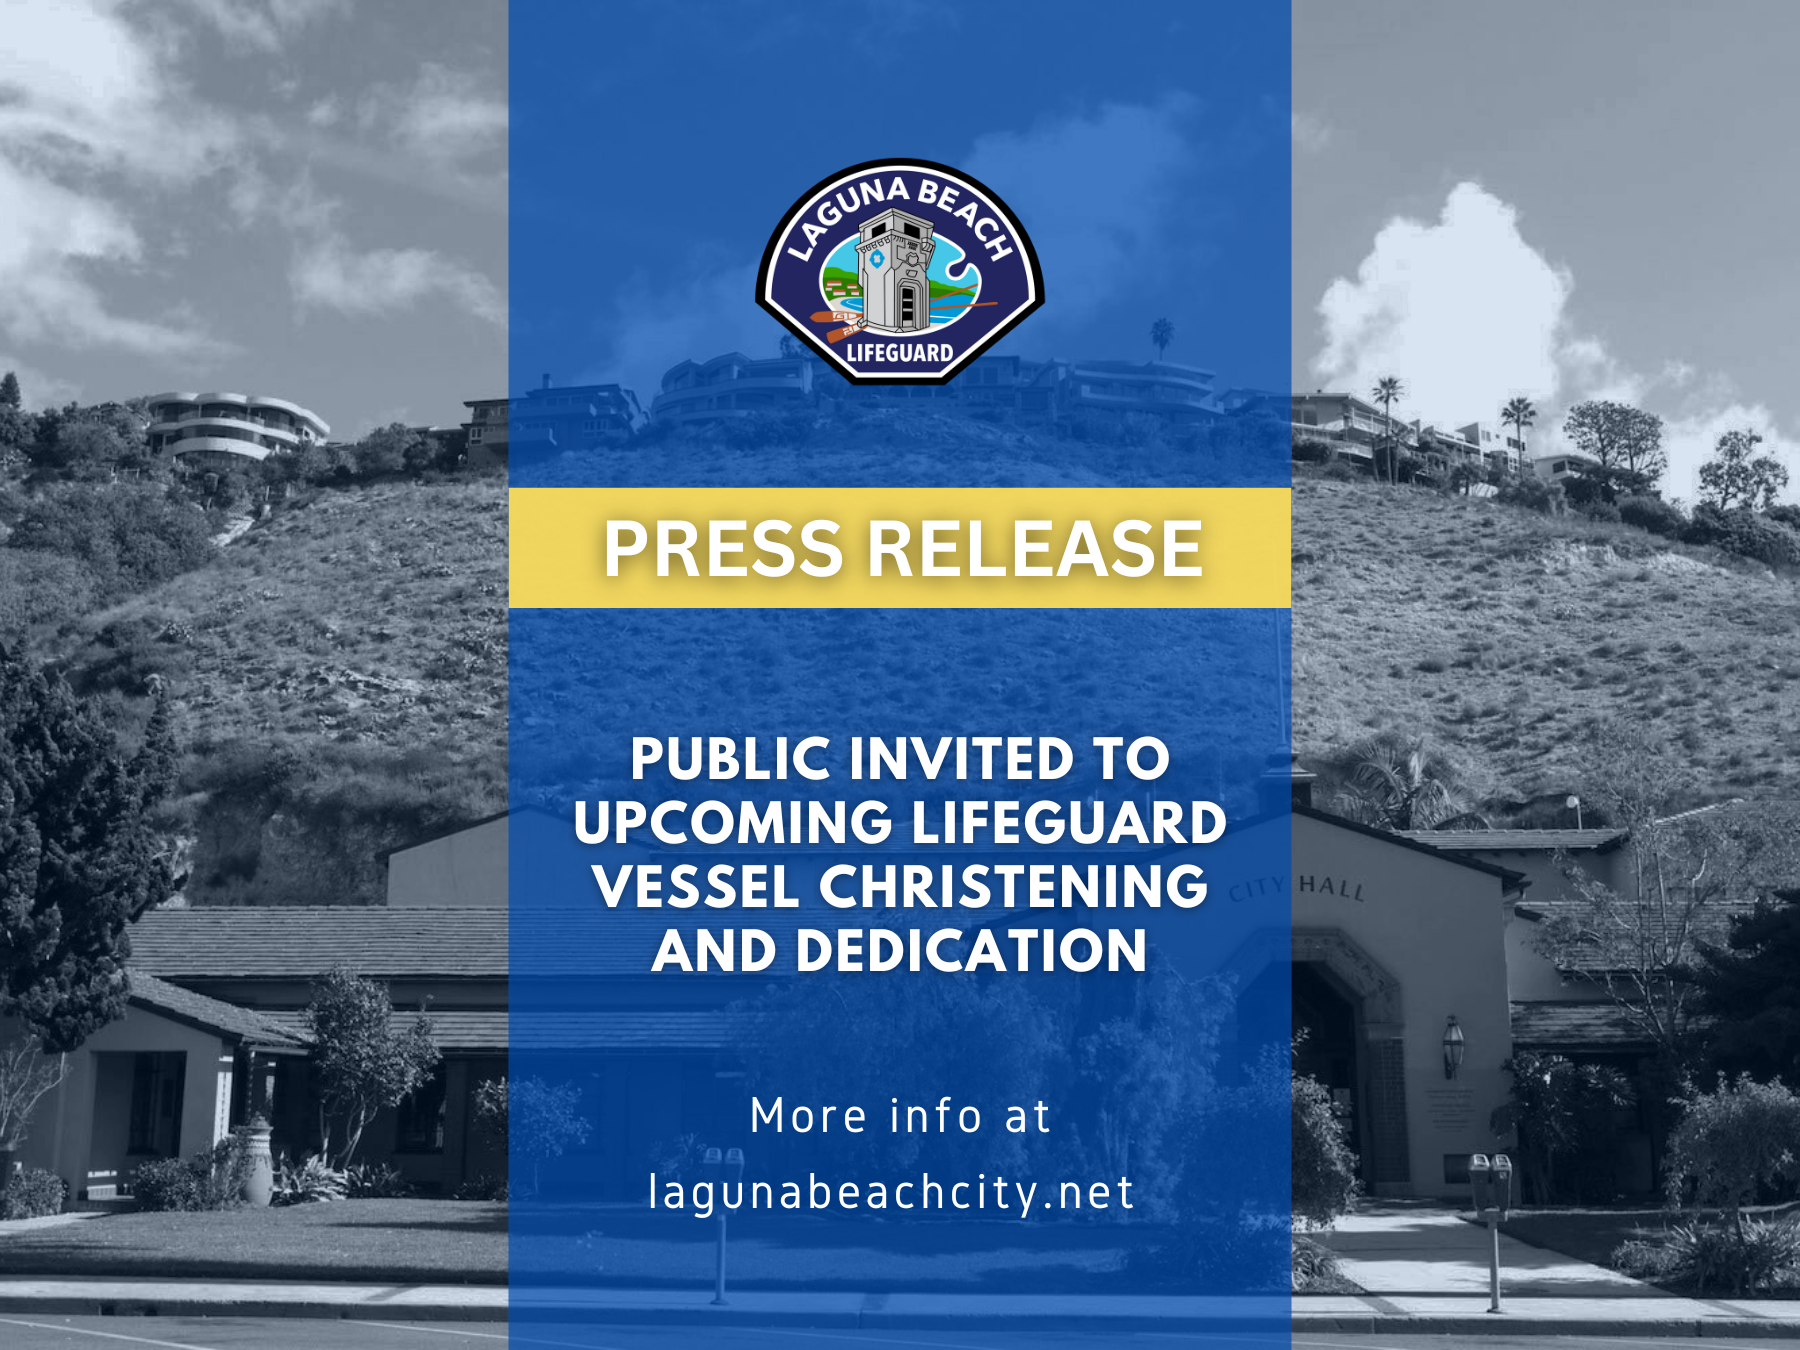 Press Release - Public Invited to Upcoming Lifeguard Vessel Christening and Dedication